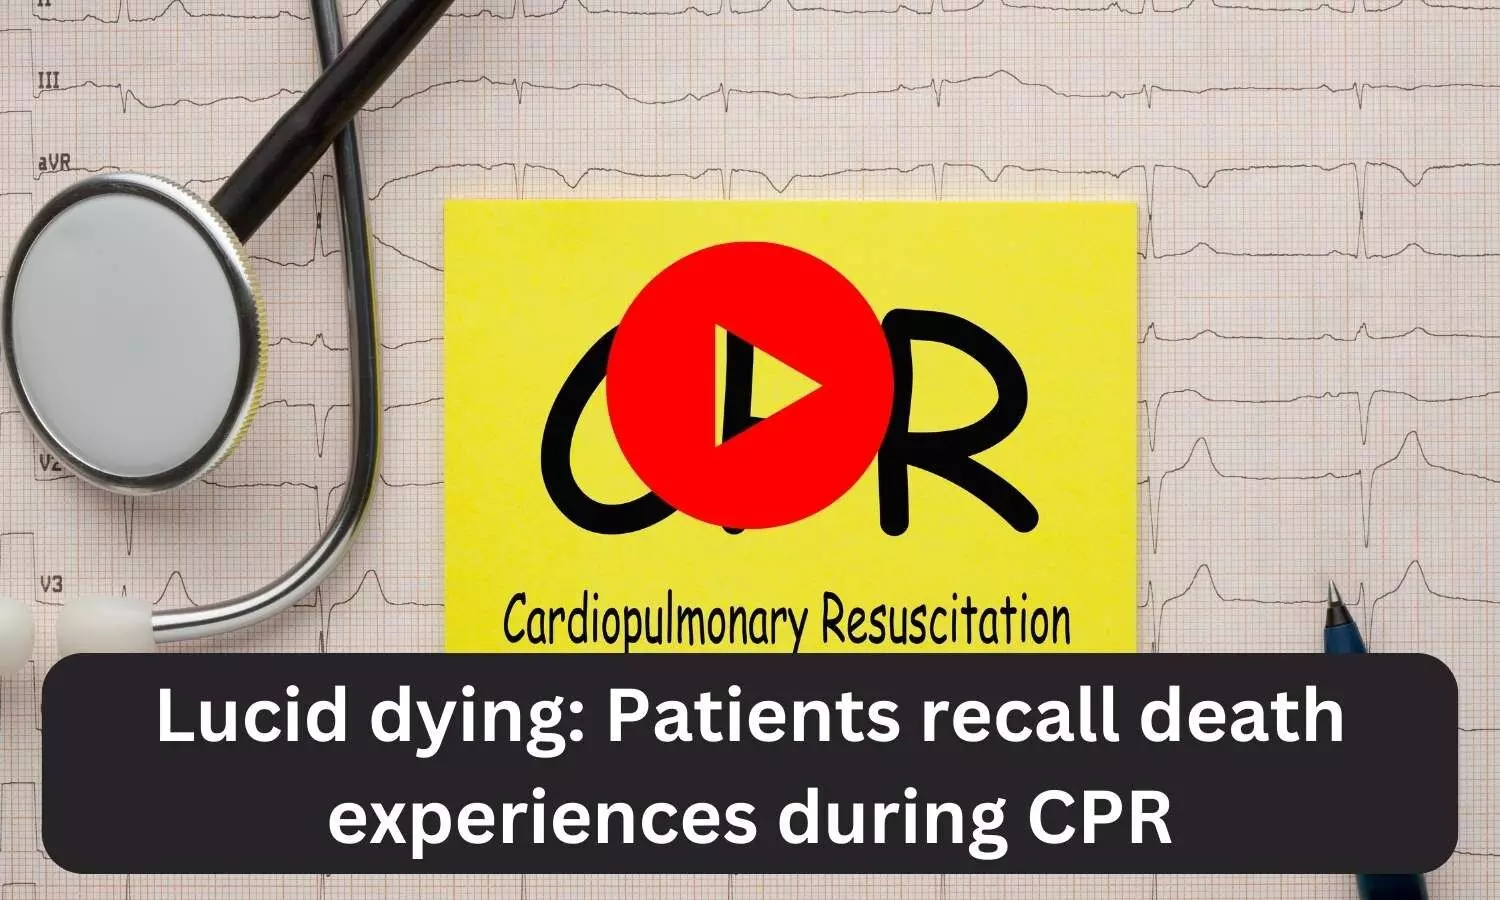 Lucid dying: Patients recall death experiences during CPR